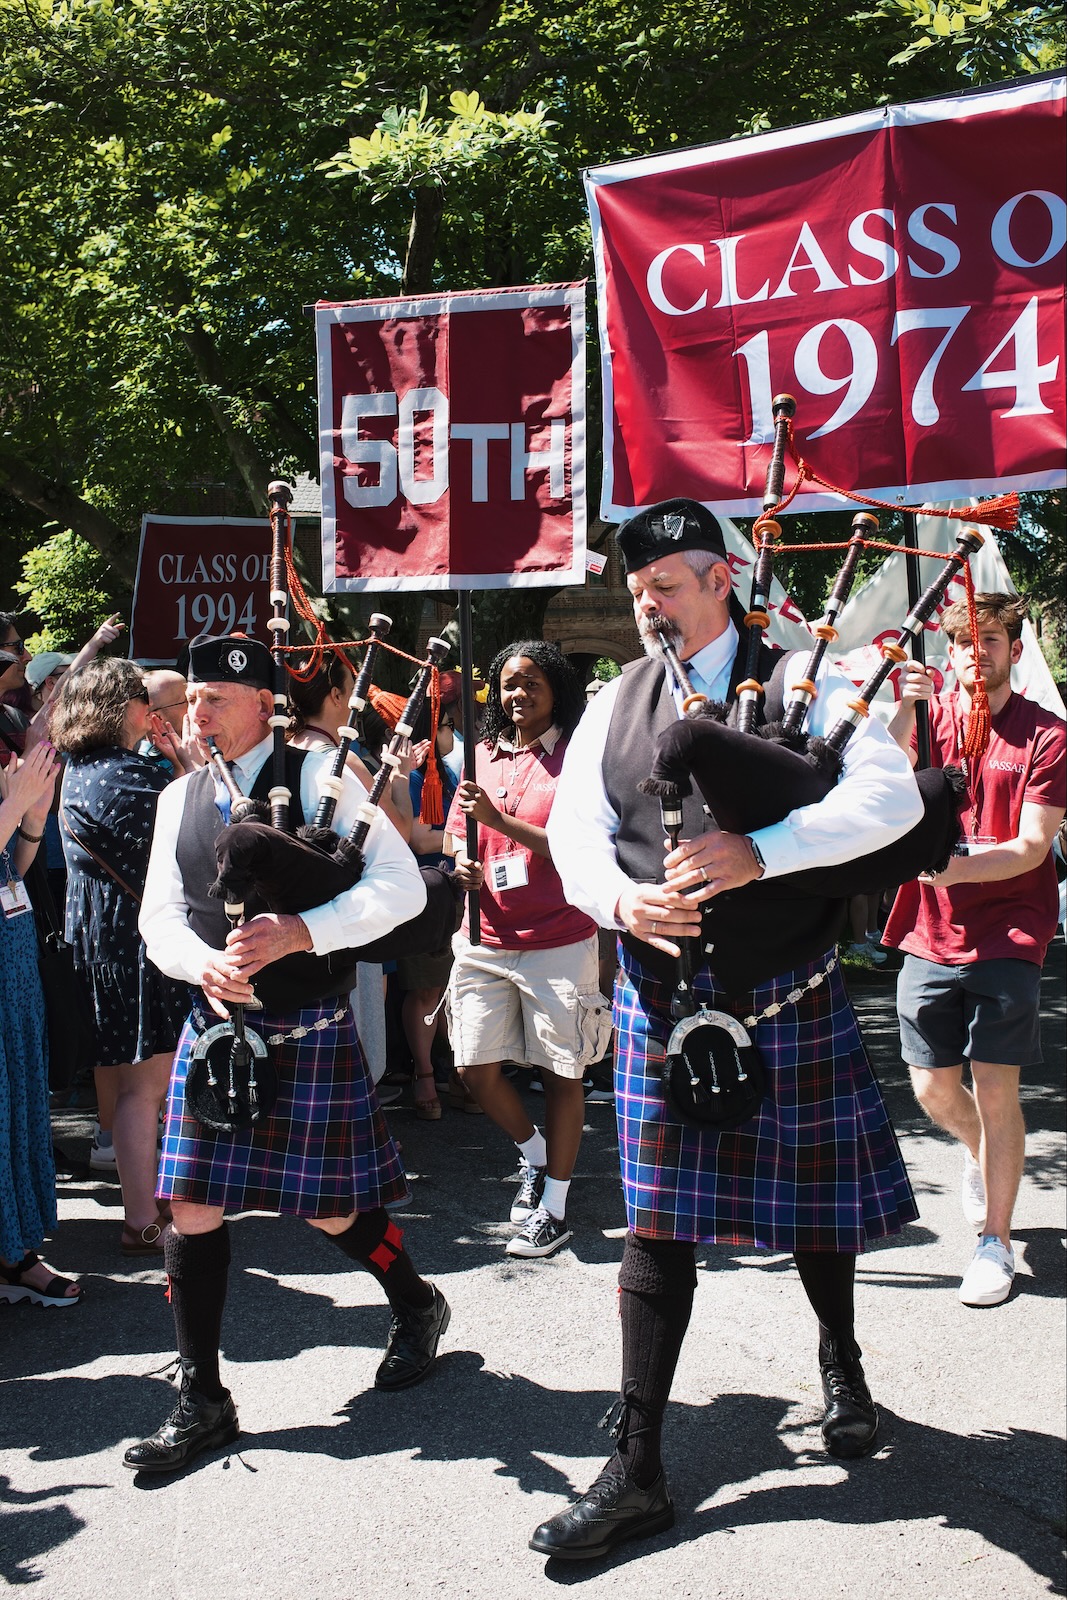 Two men wearing kilts play bagpipes in front of students holding up a banner reading “Class of 1974”.